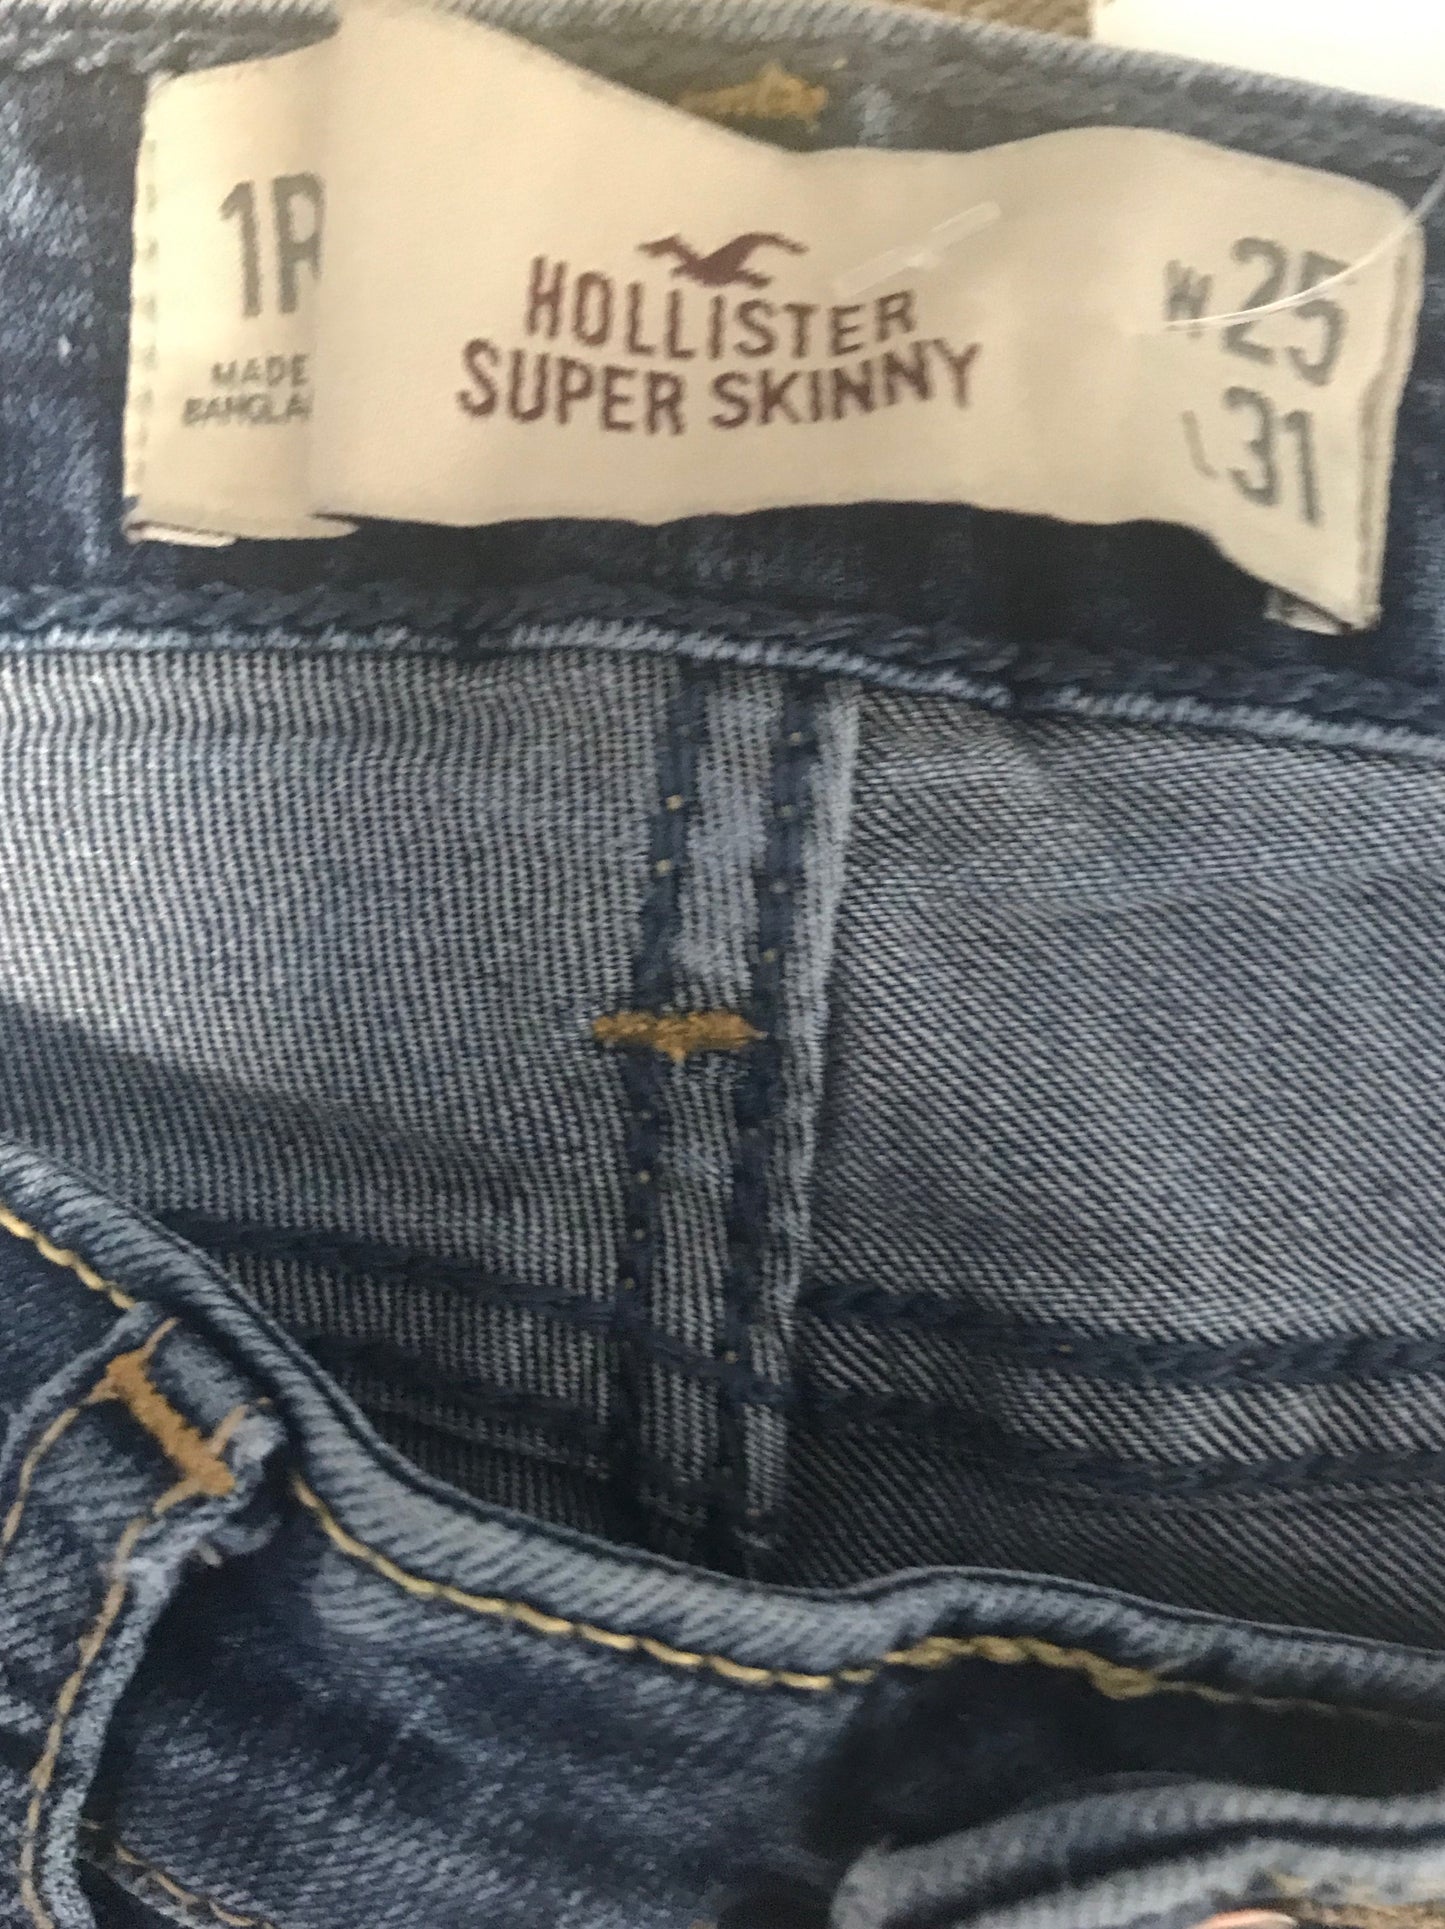 Buy Hollister clothing at outlet prices